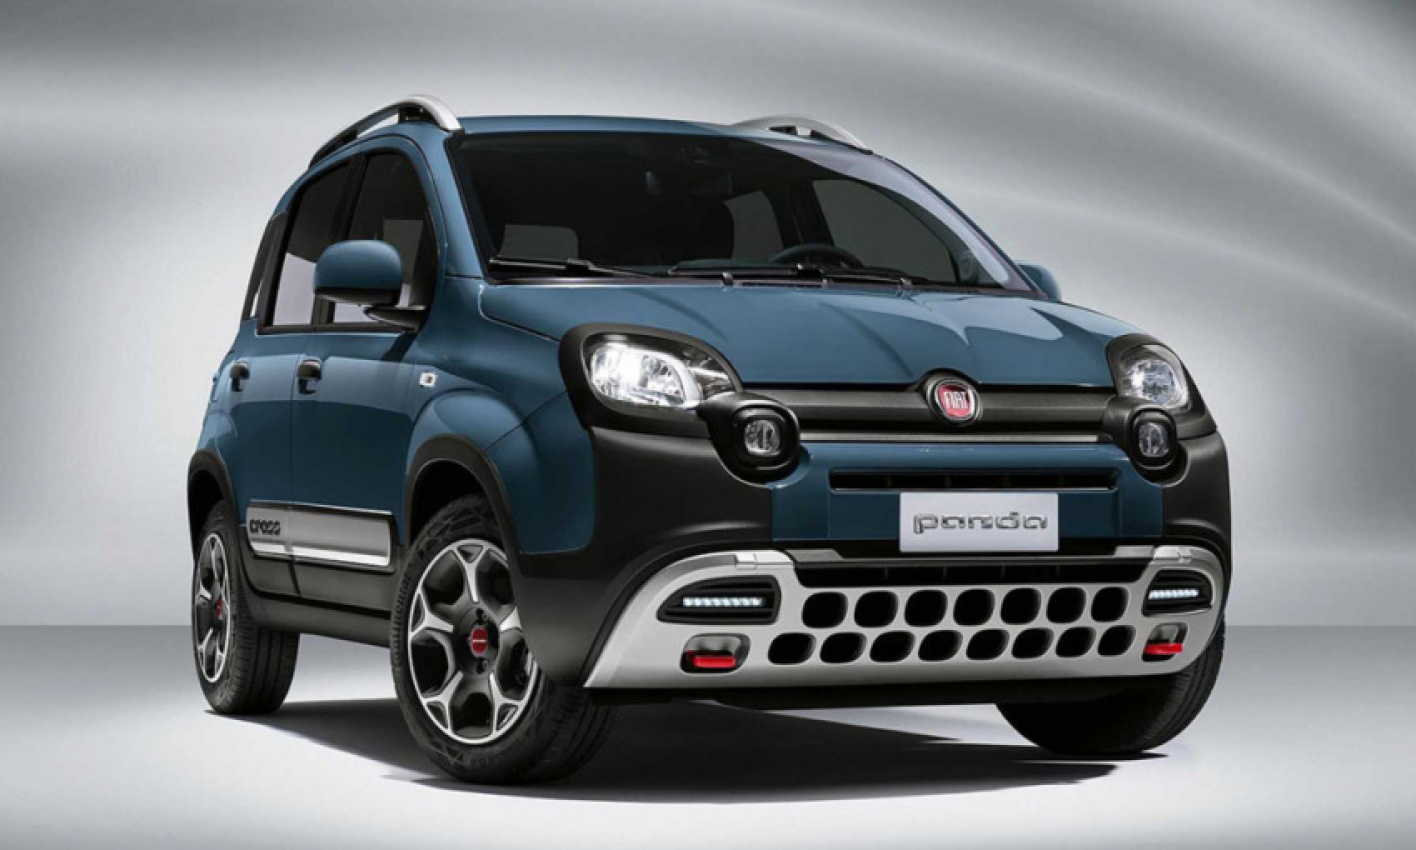 autos, cars, fiat, ford, industry news, carlos tavares, fiat panda, hybrid, ice, industry news, panda, production, stellantis, affordable fiat panda will be produced until 2026 in pomigliano